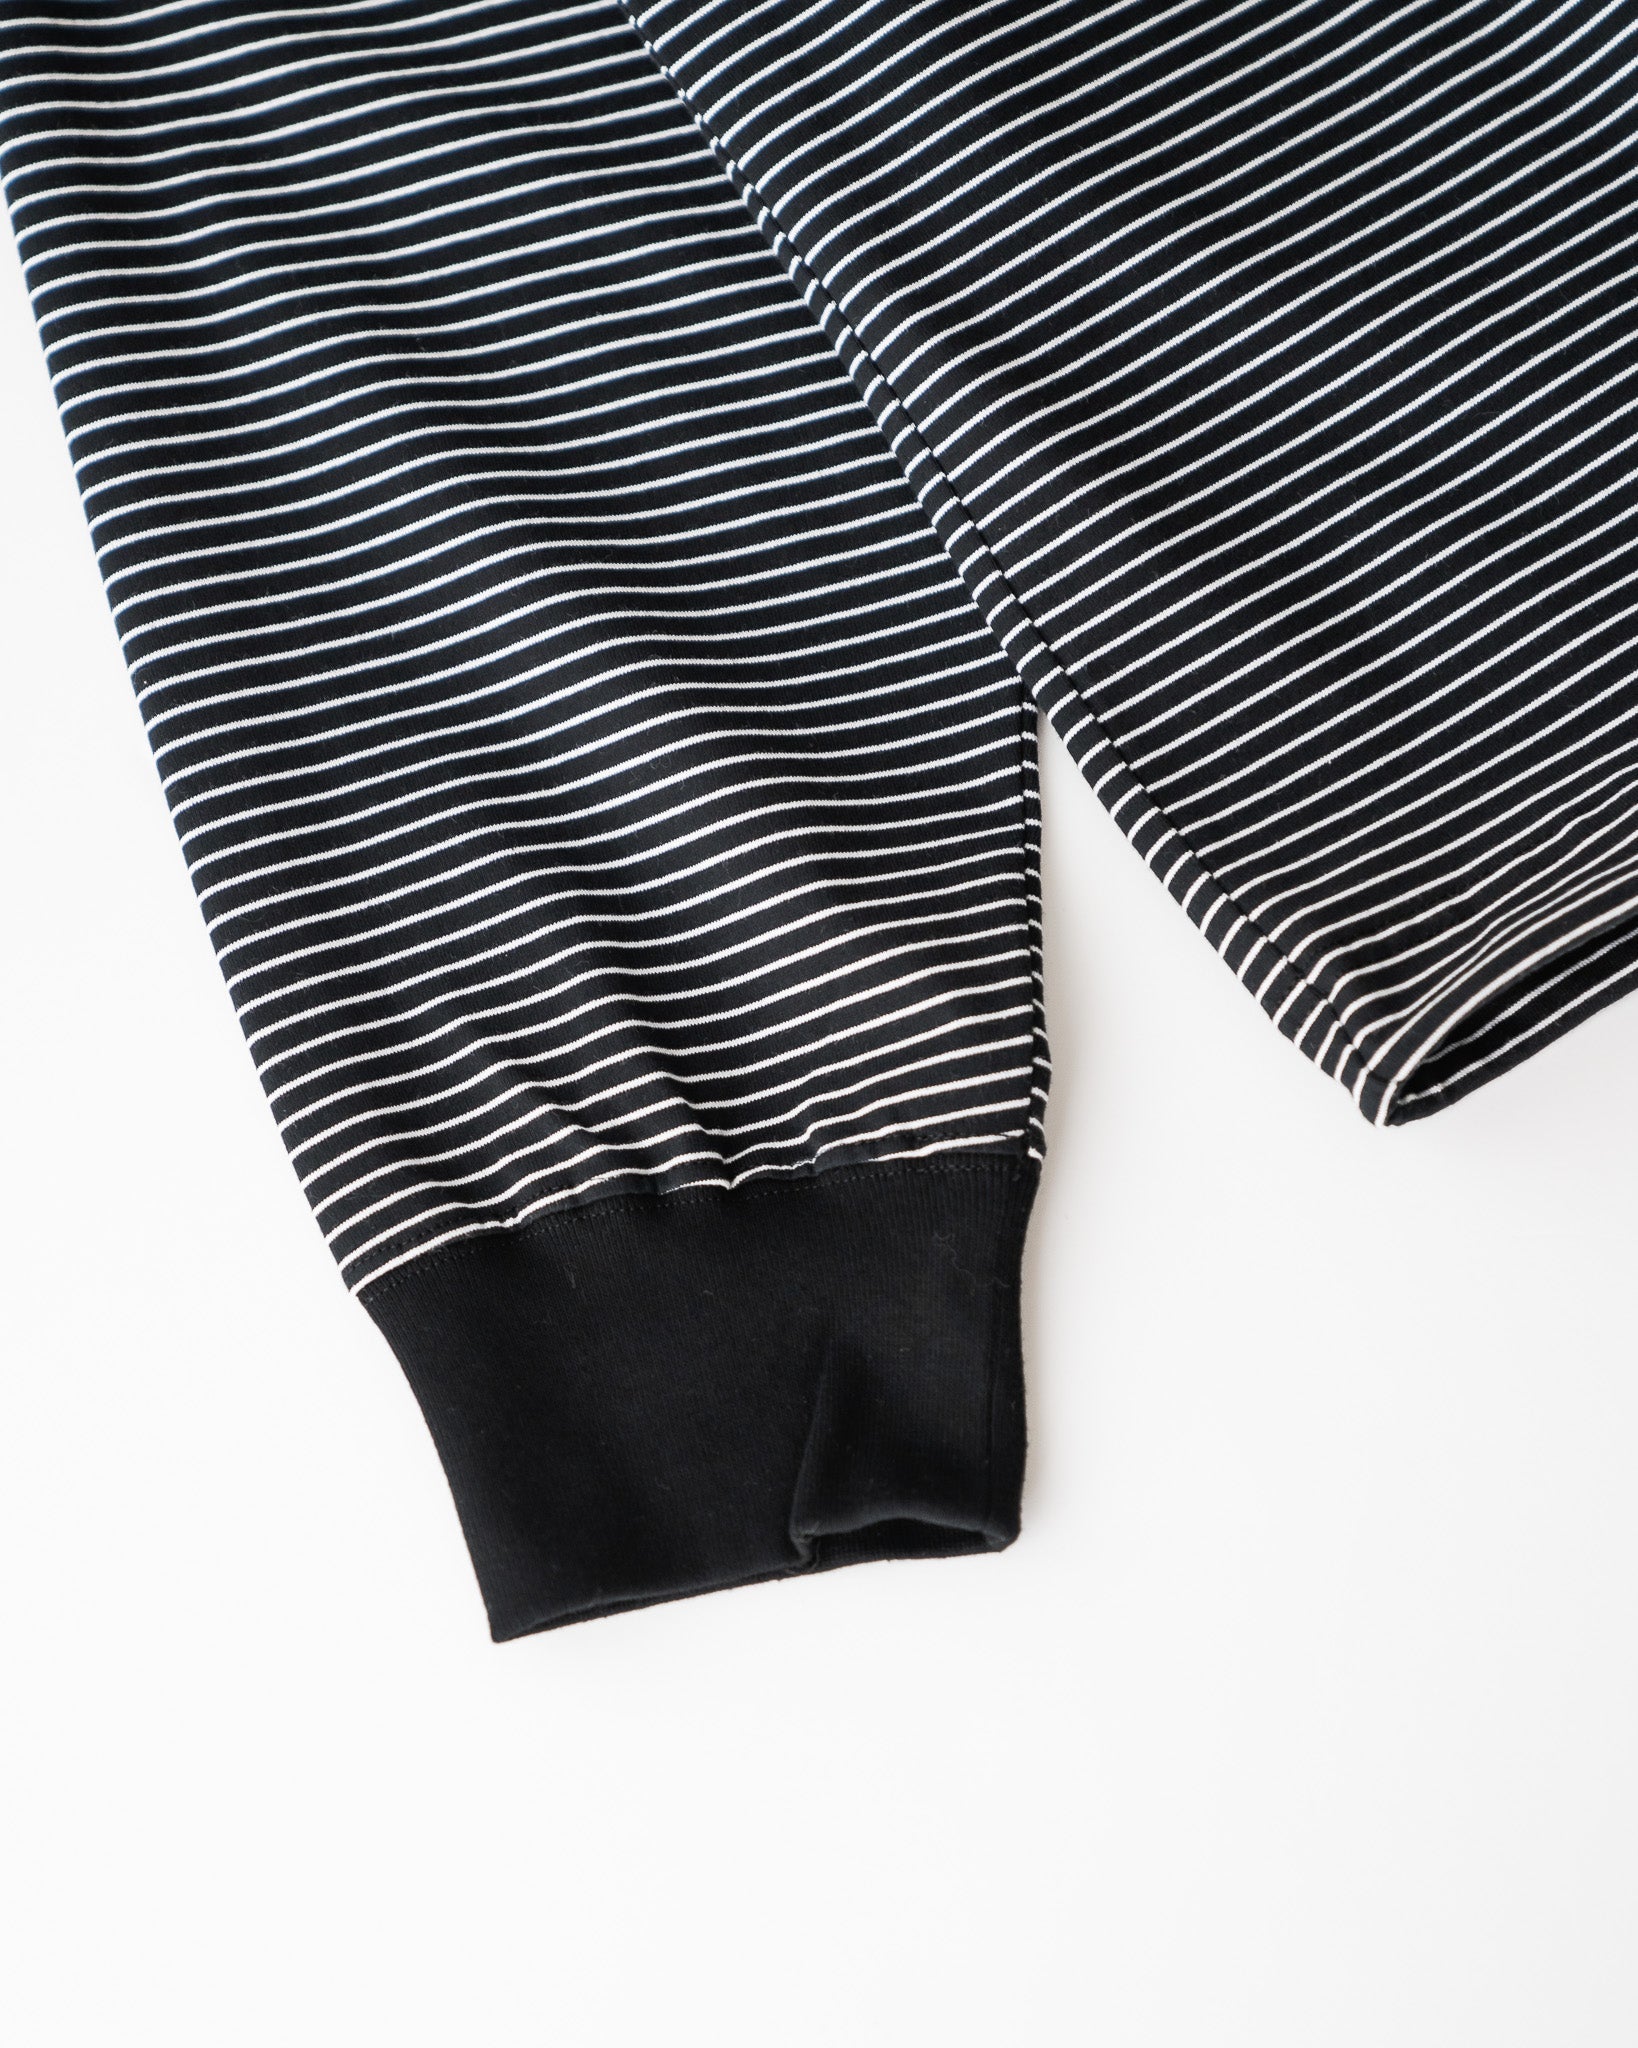 STRIPED MASSIVE L/S T-SHIRT WITH DRAWSTRINGS..